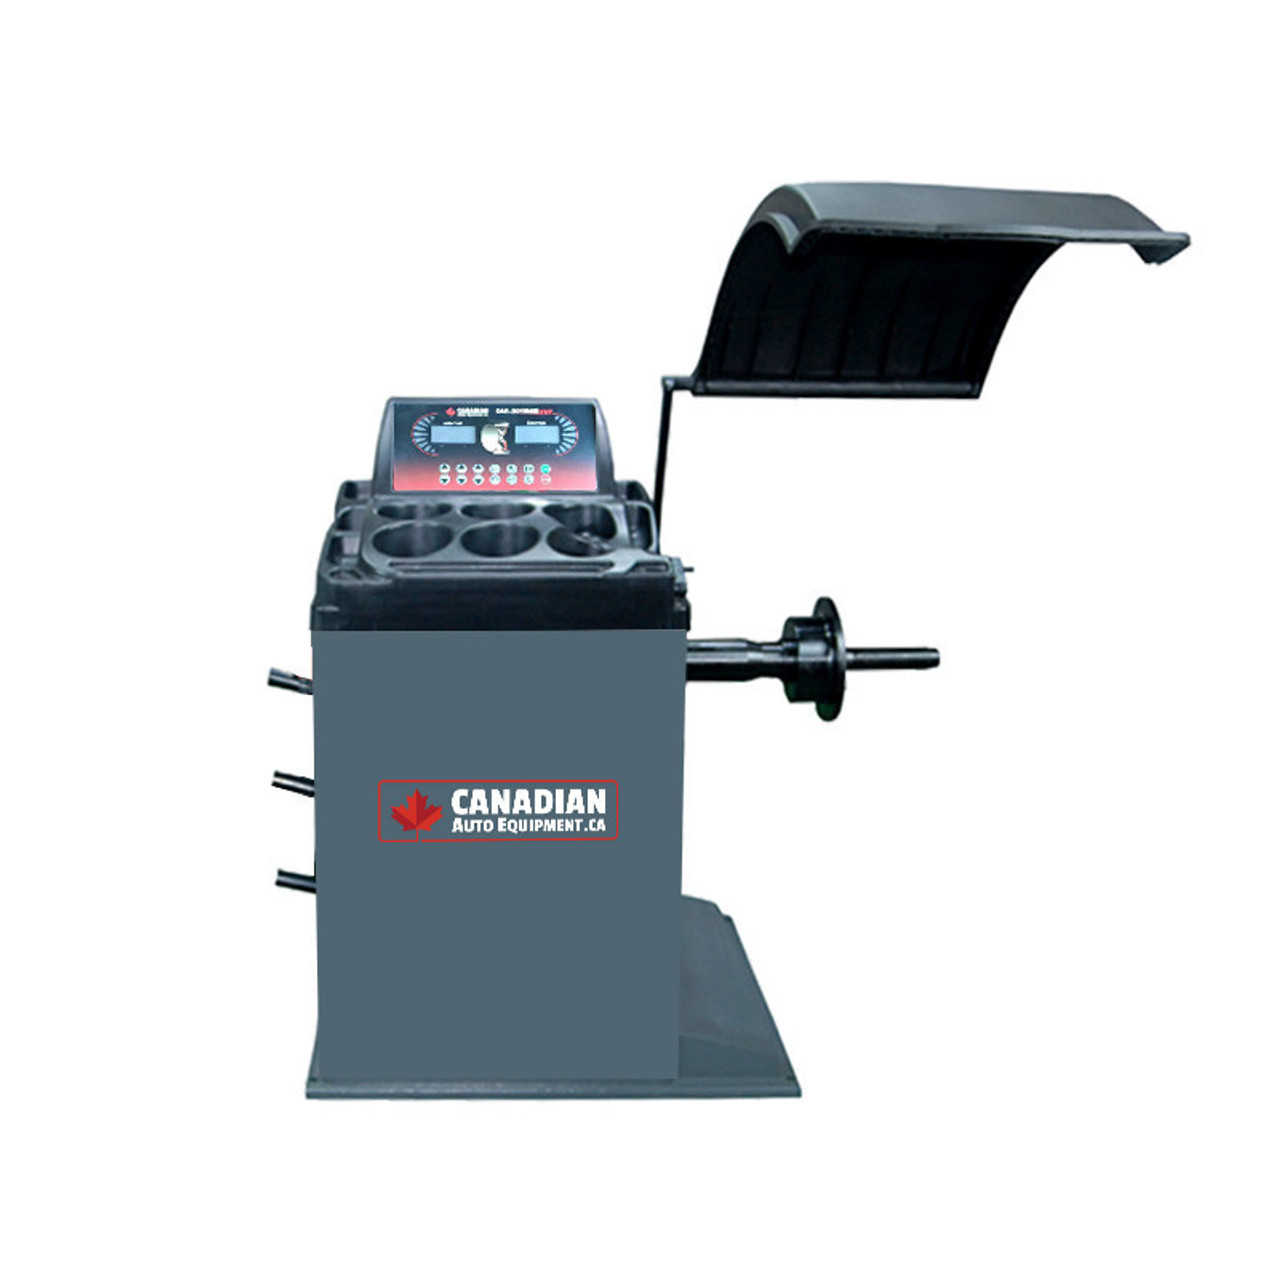 CAE-2765 Tire Changer with Pneumatic Lock Lever & CAE-3019 Wheel Balancer with Manual Entry